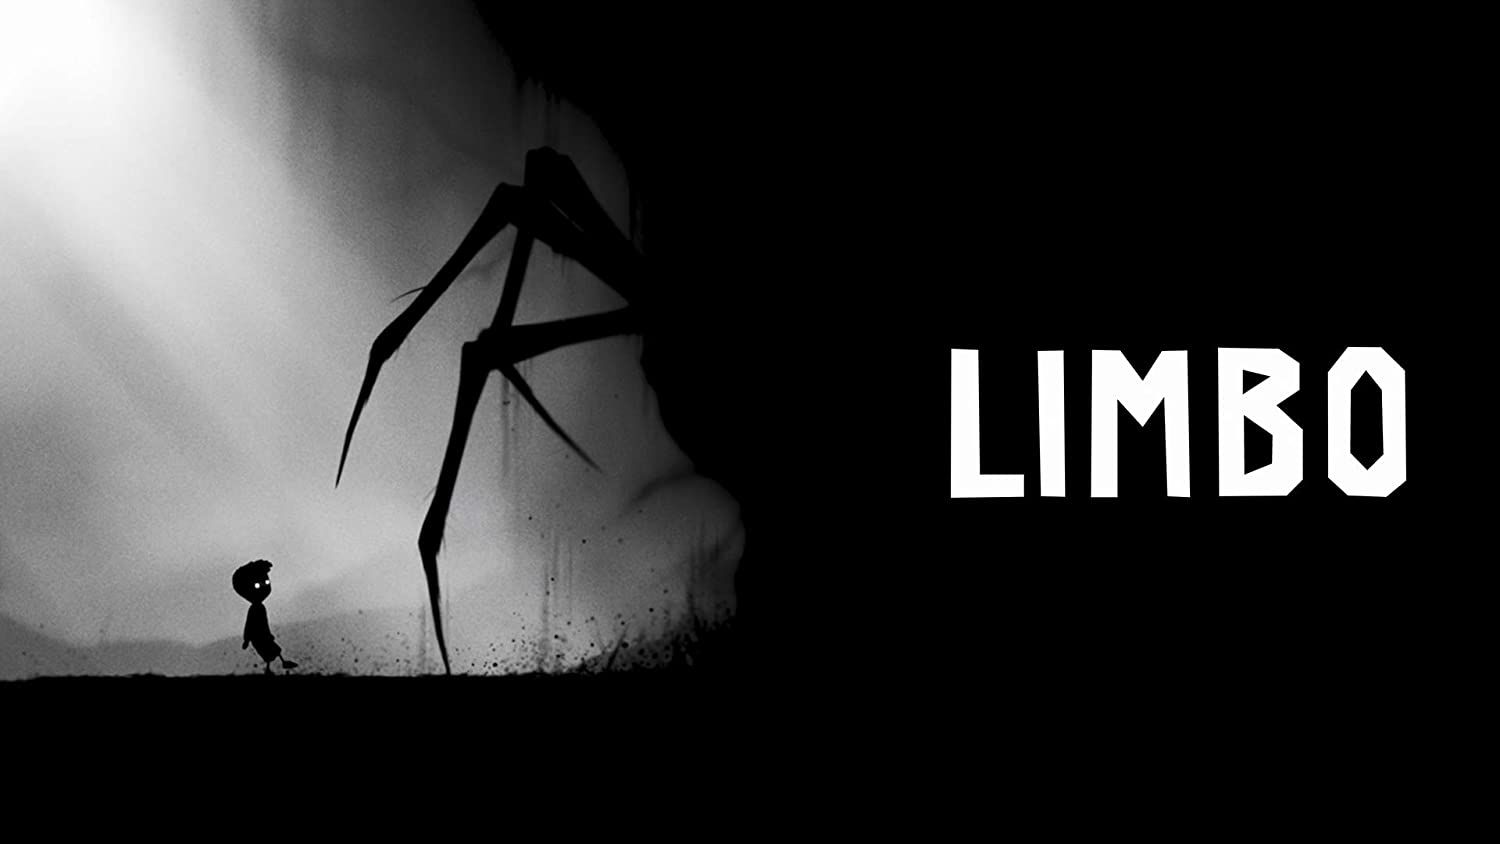 Official Limbo art from promotion